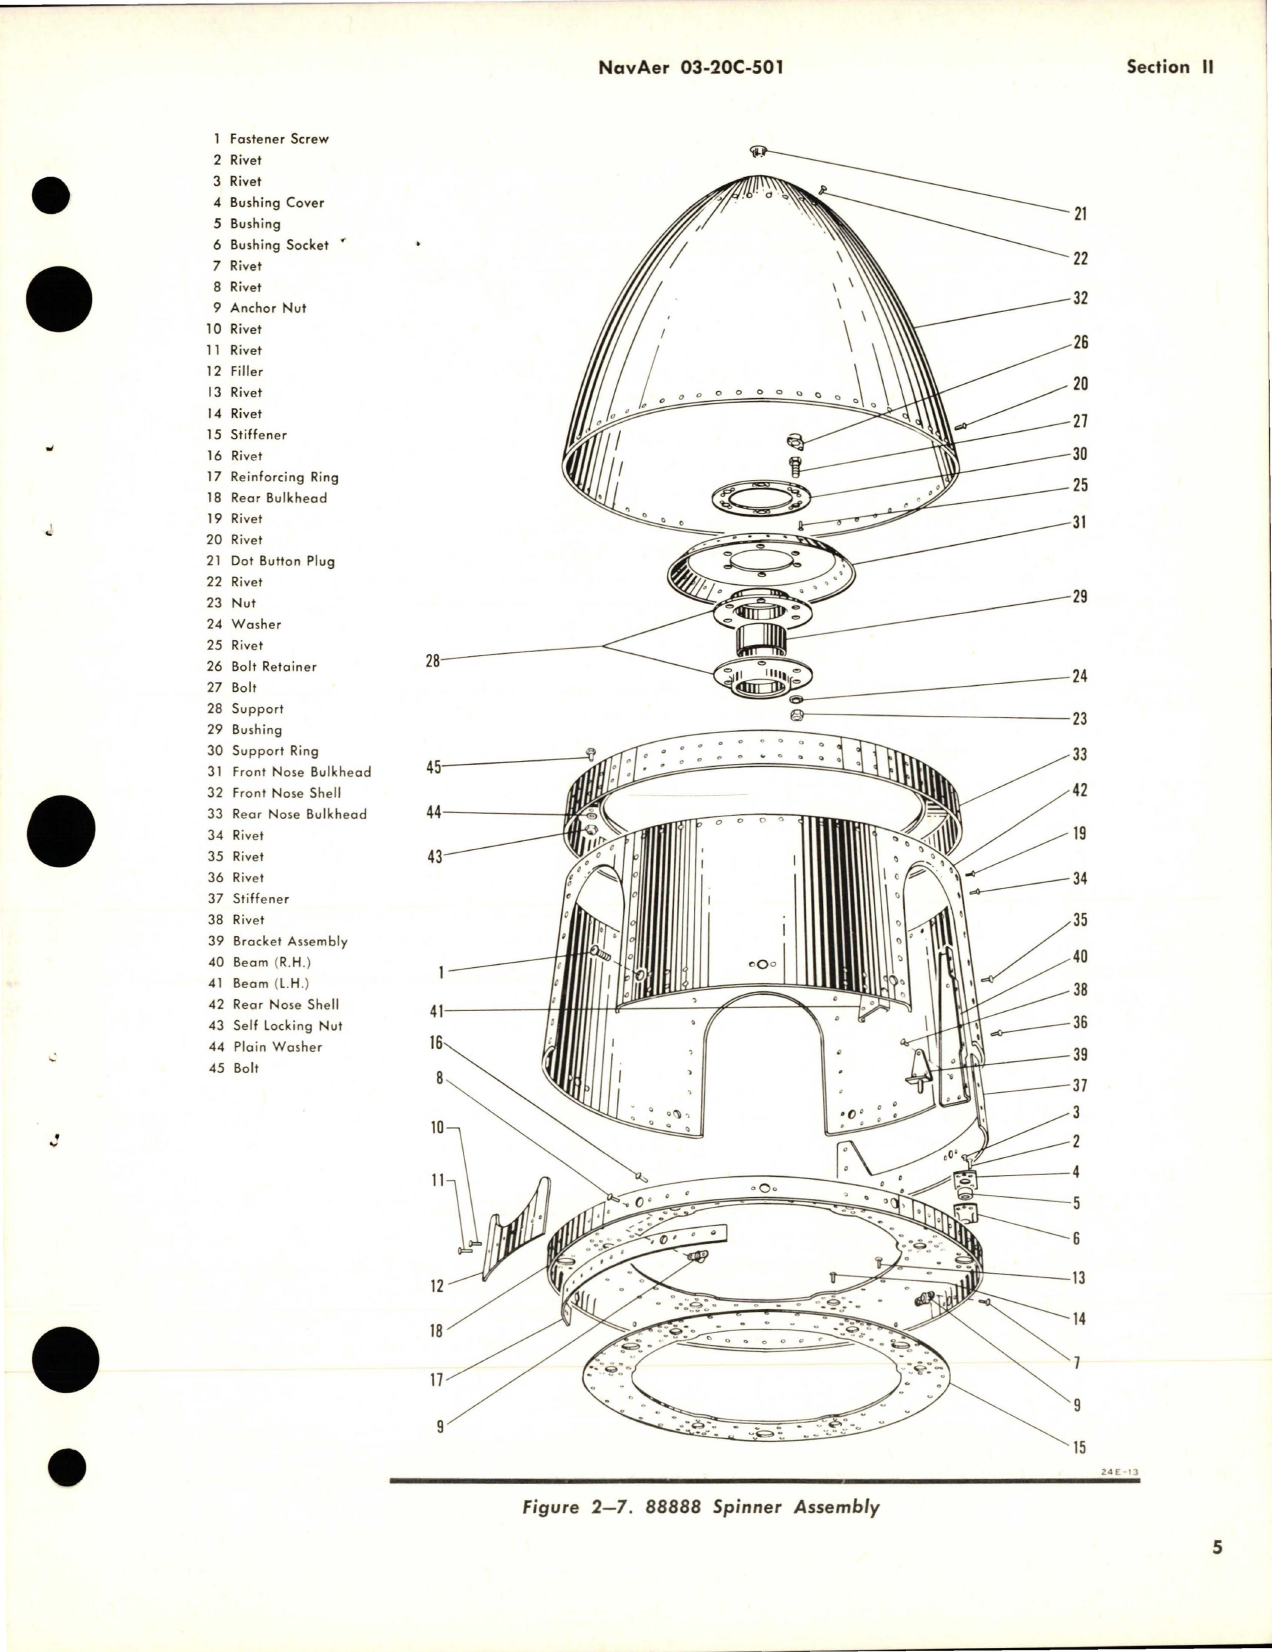 Sample page 9 from AirCorps Library document: Overhaul Instructions for Spinner Assembly